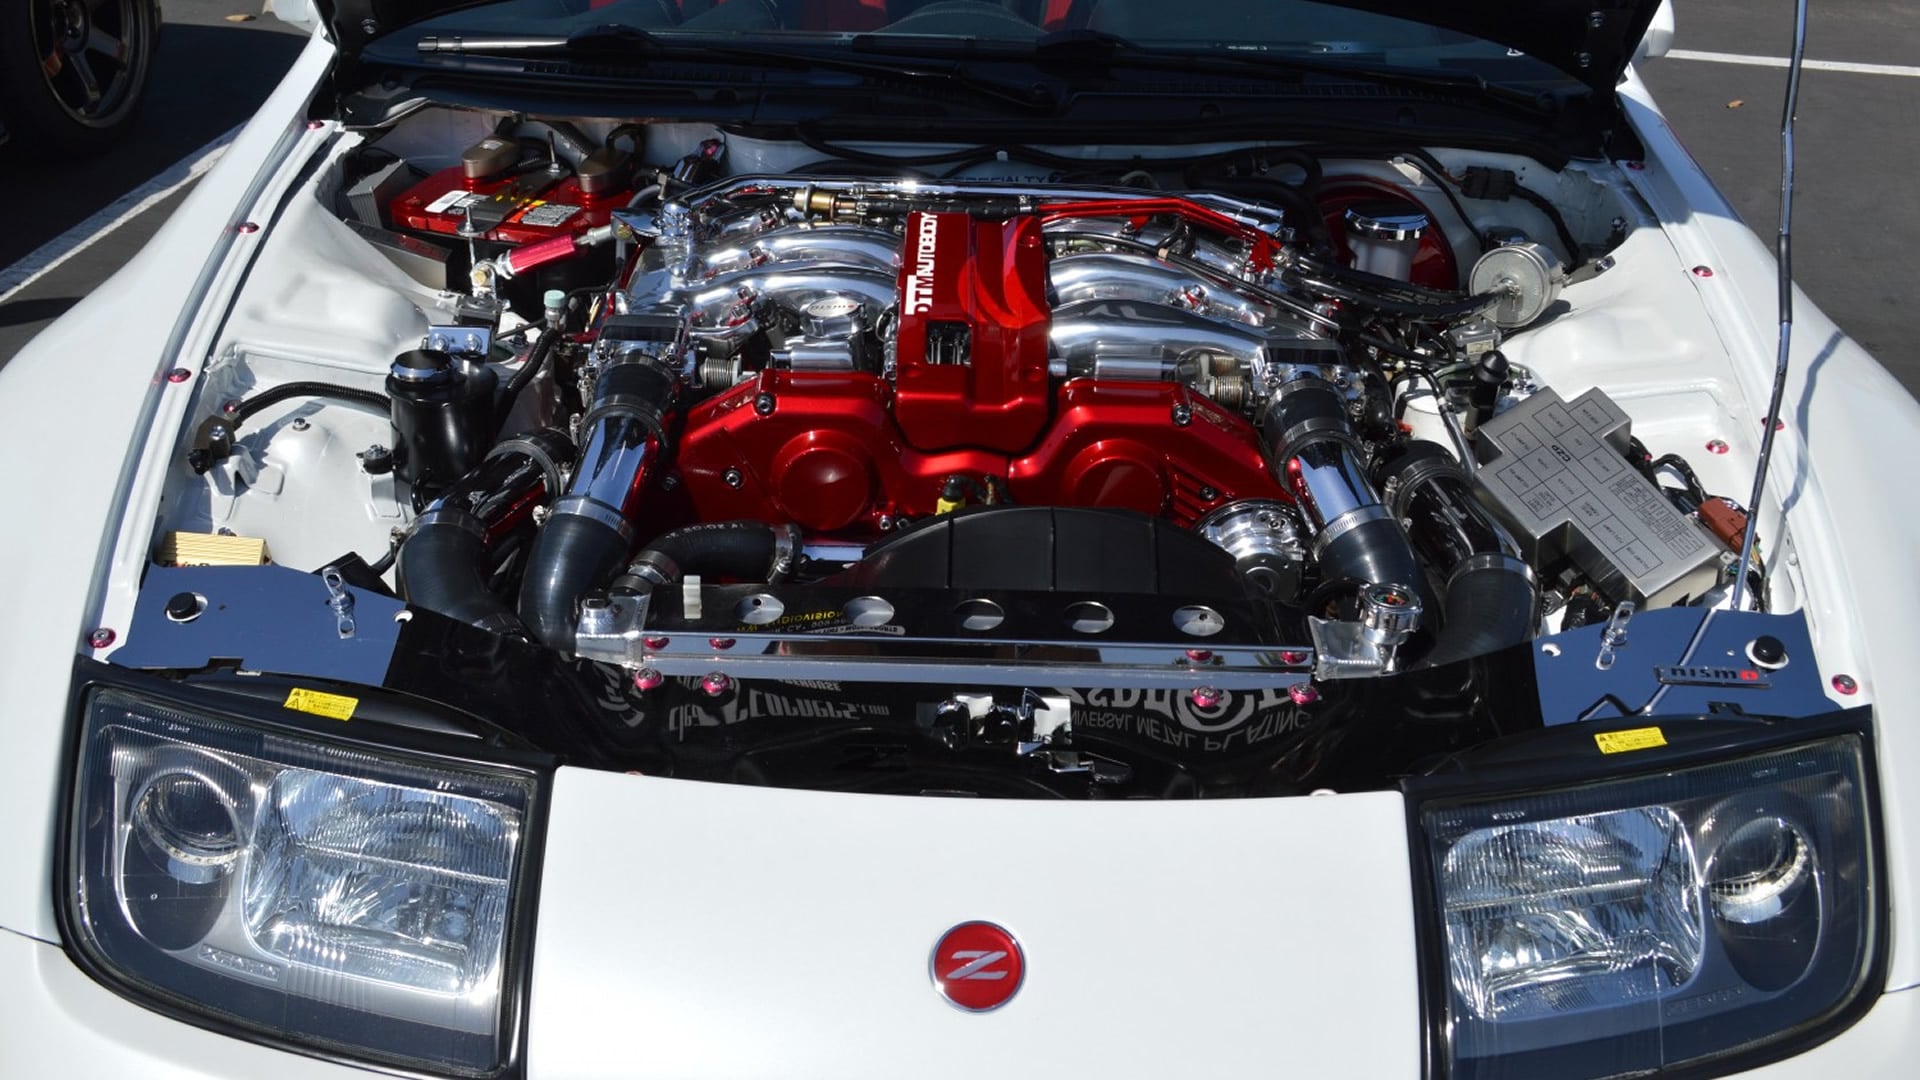 This Z32 was in pristine condition with a perfect engine bay. 